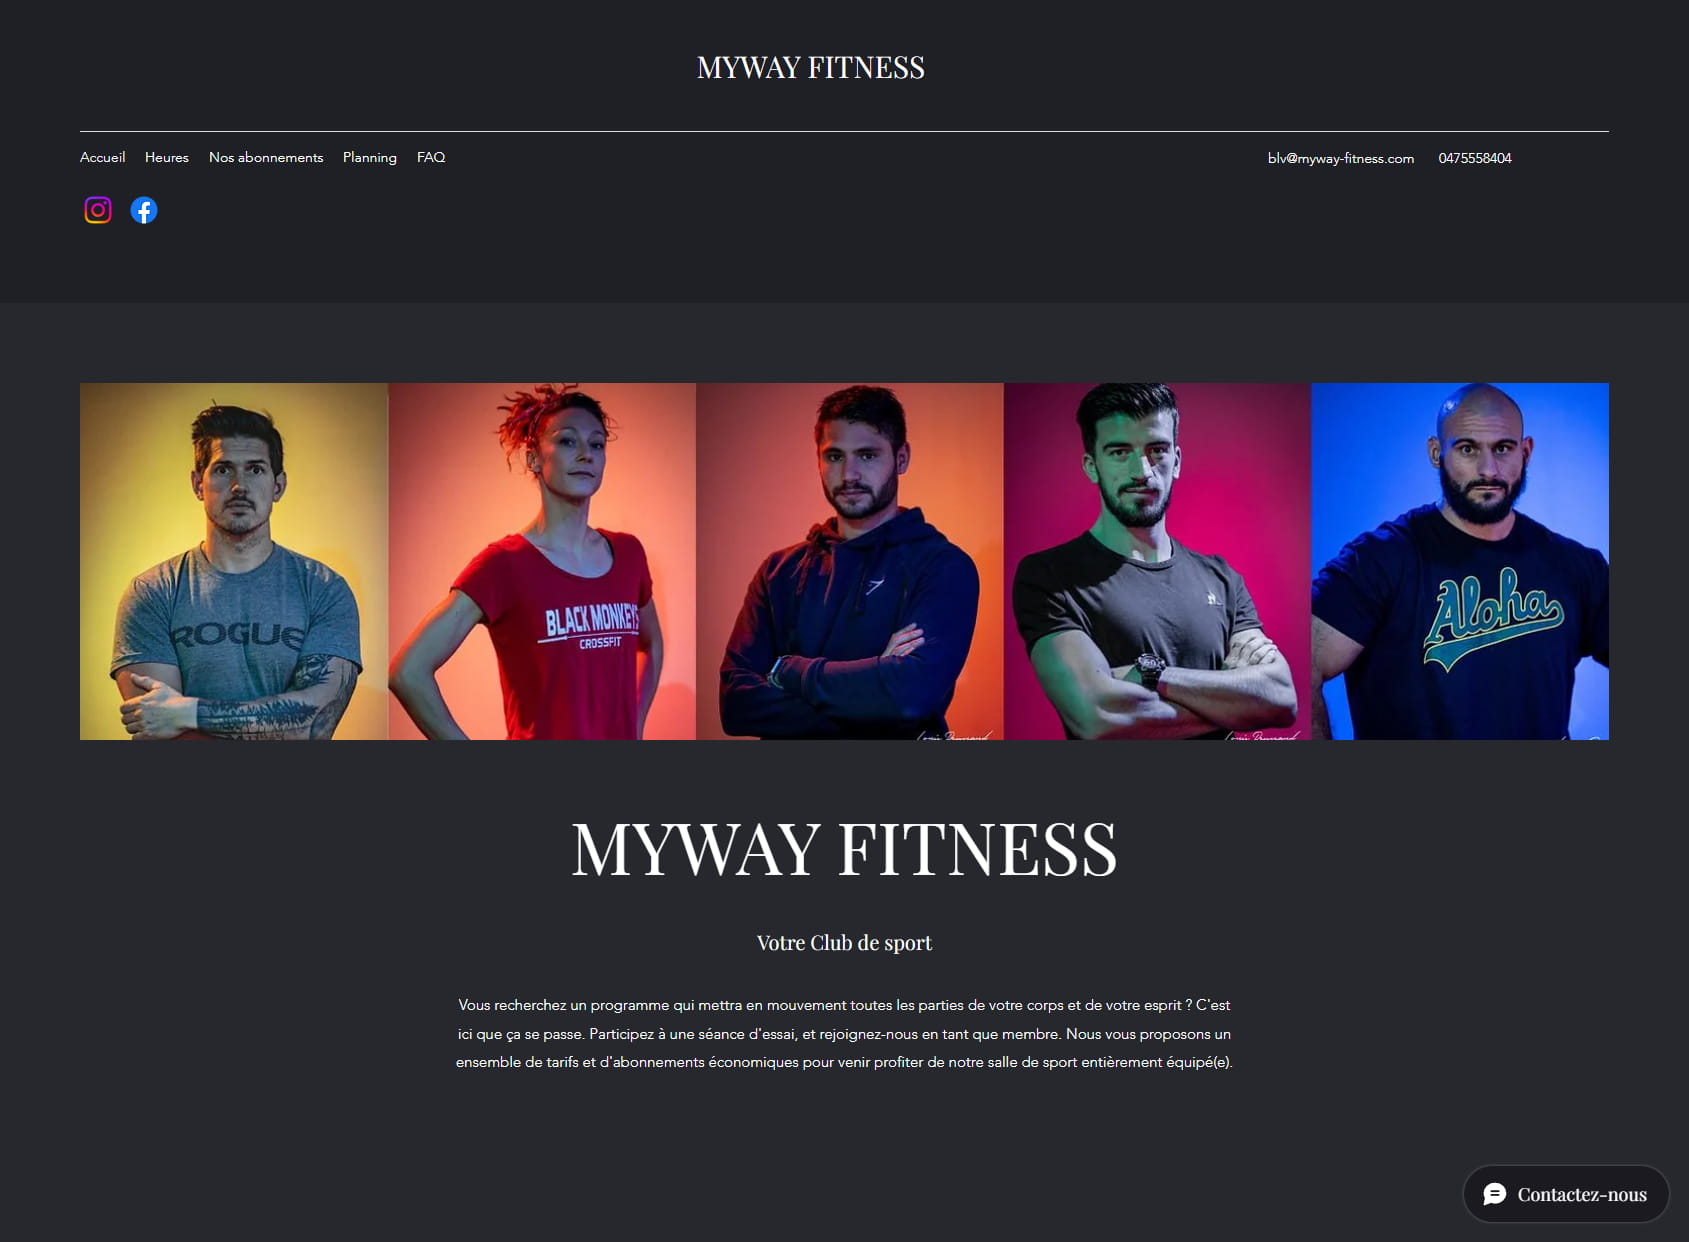 MYWAY FITNESS VALENCE